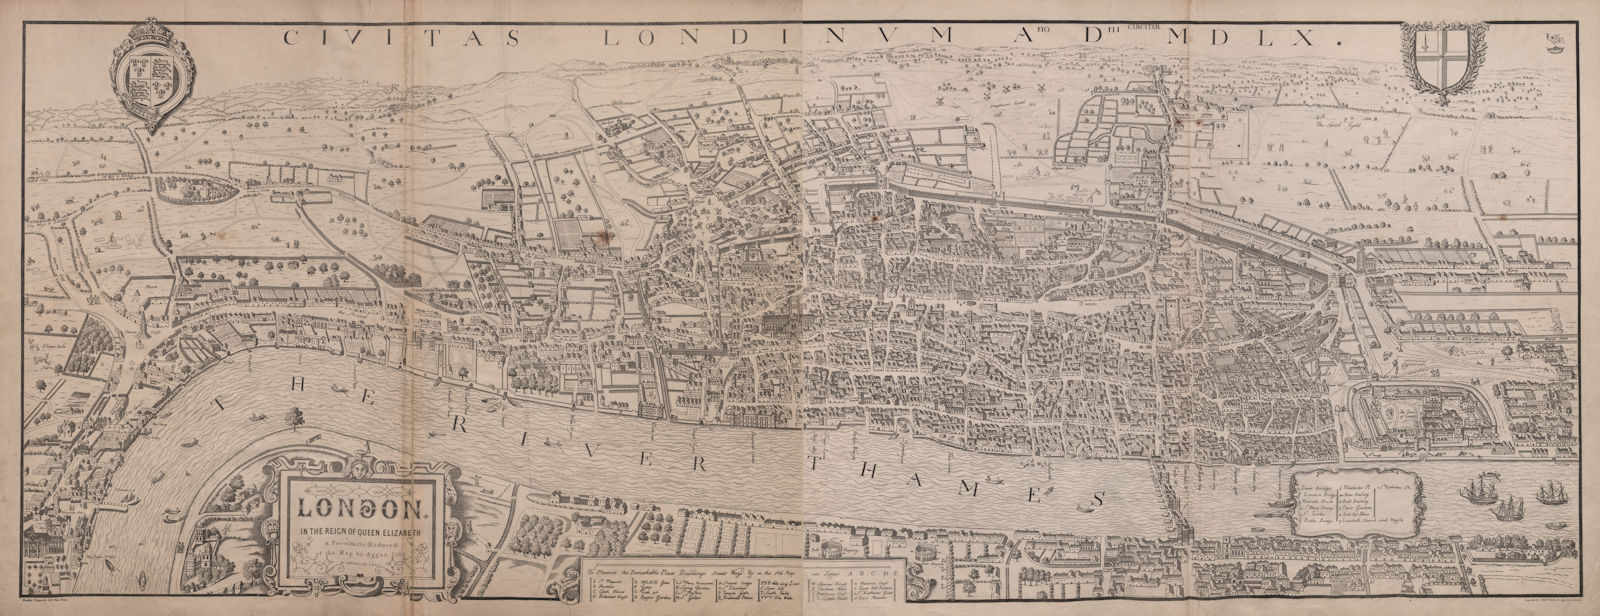 'London in the reign of Queen Elizabeth' after Agas' 1560 map. WELLER 1868